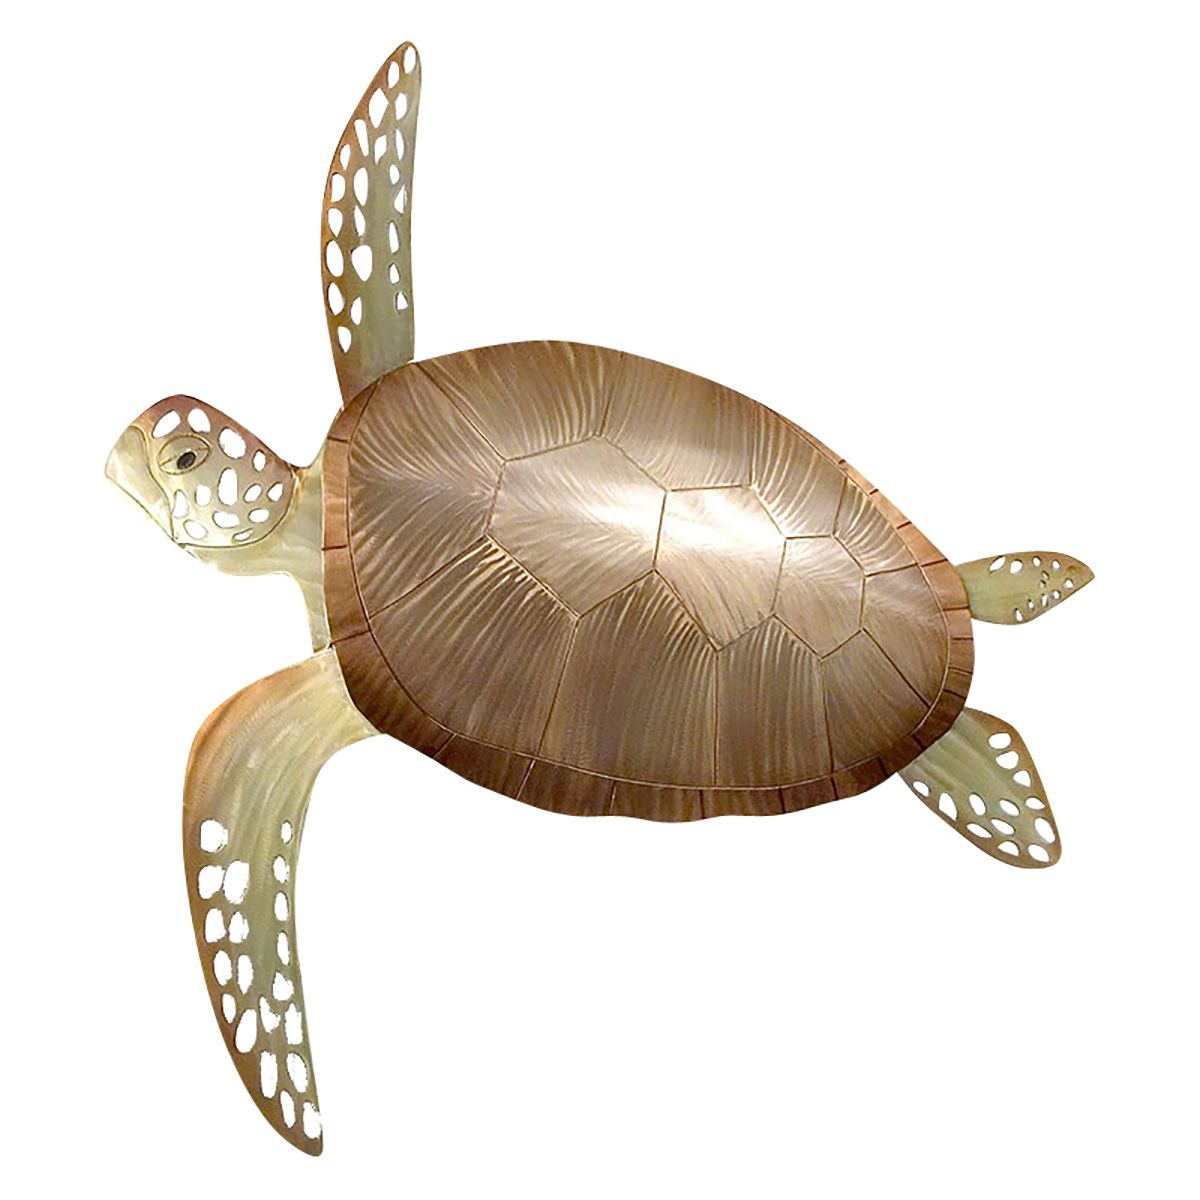 Beach Wall Art: Swimming Solo Turtle Wall Art Intended For Turtles Wall Art (View 8 of 15)